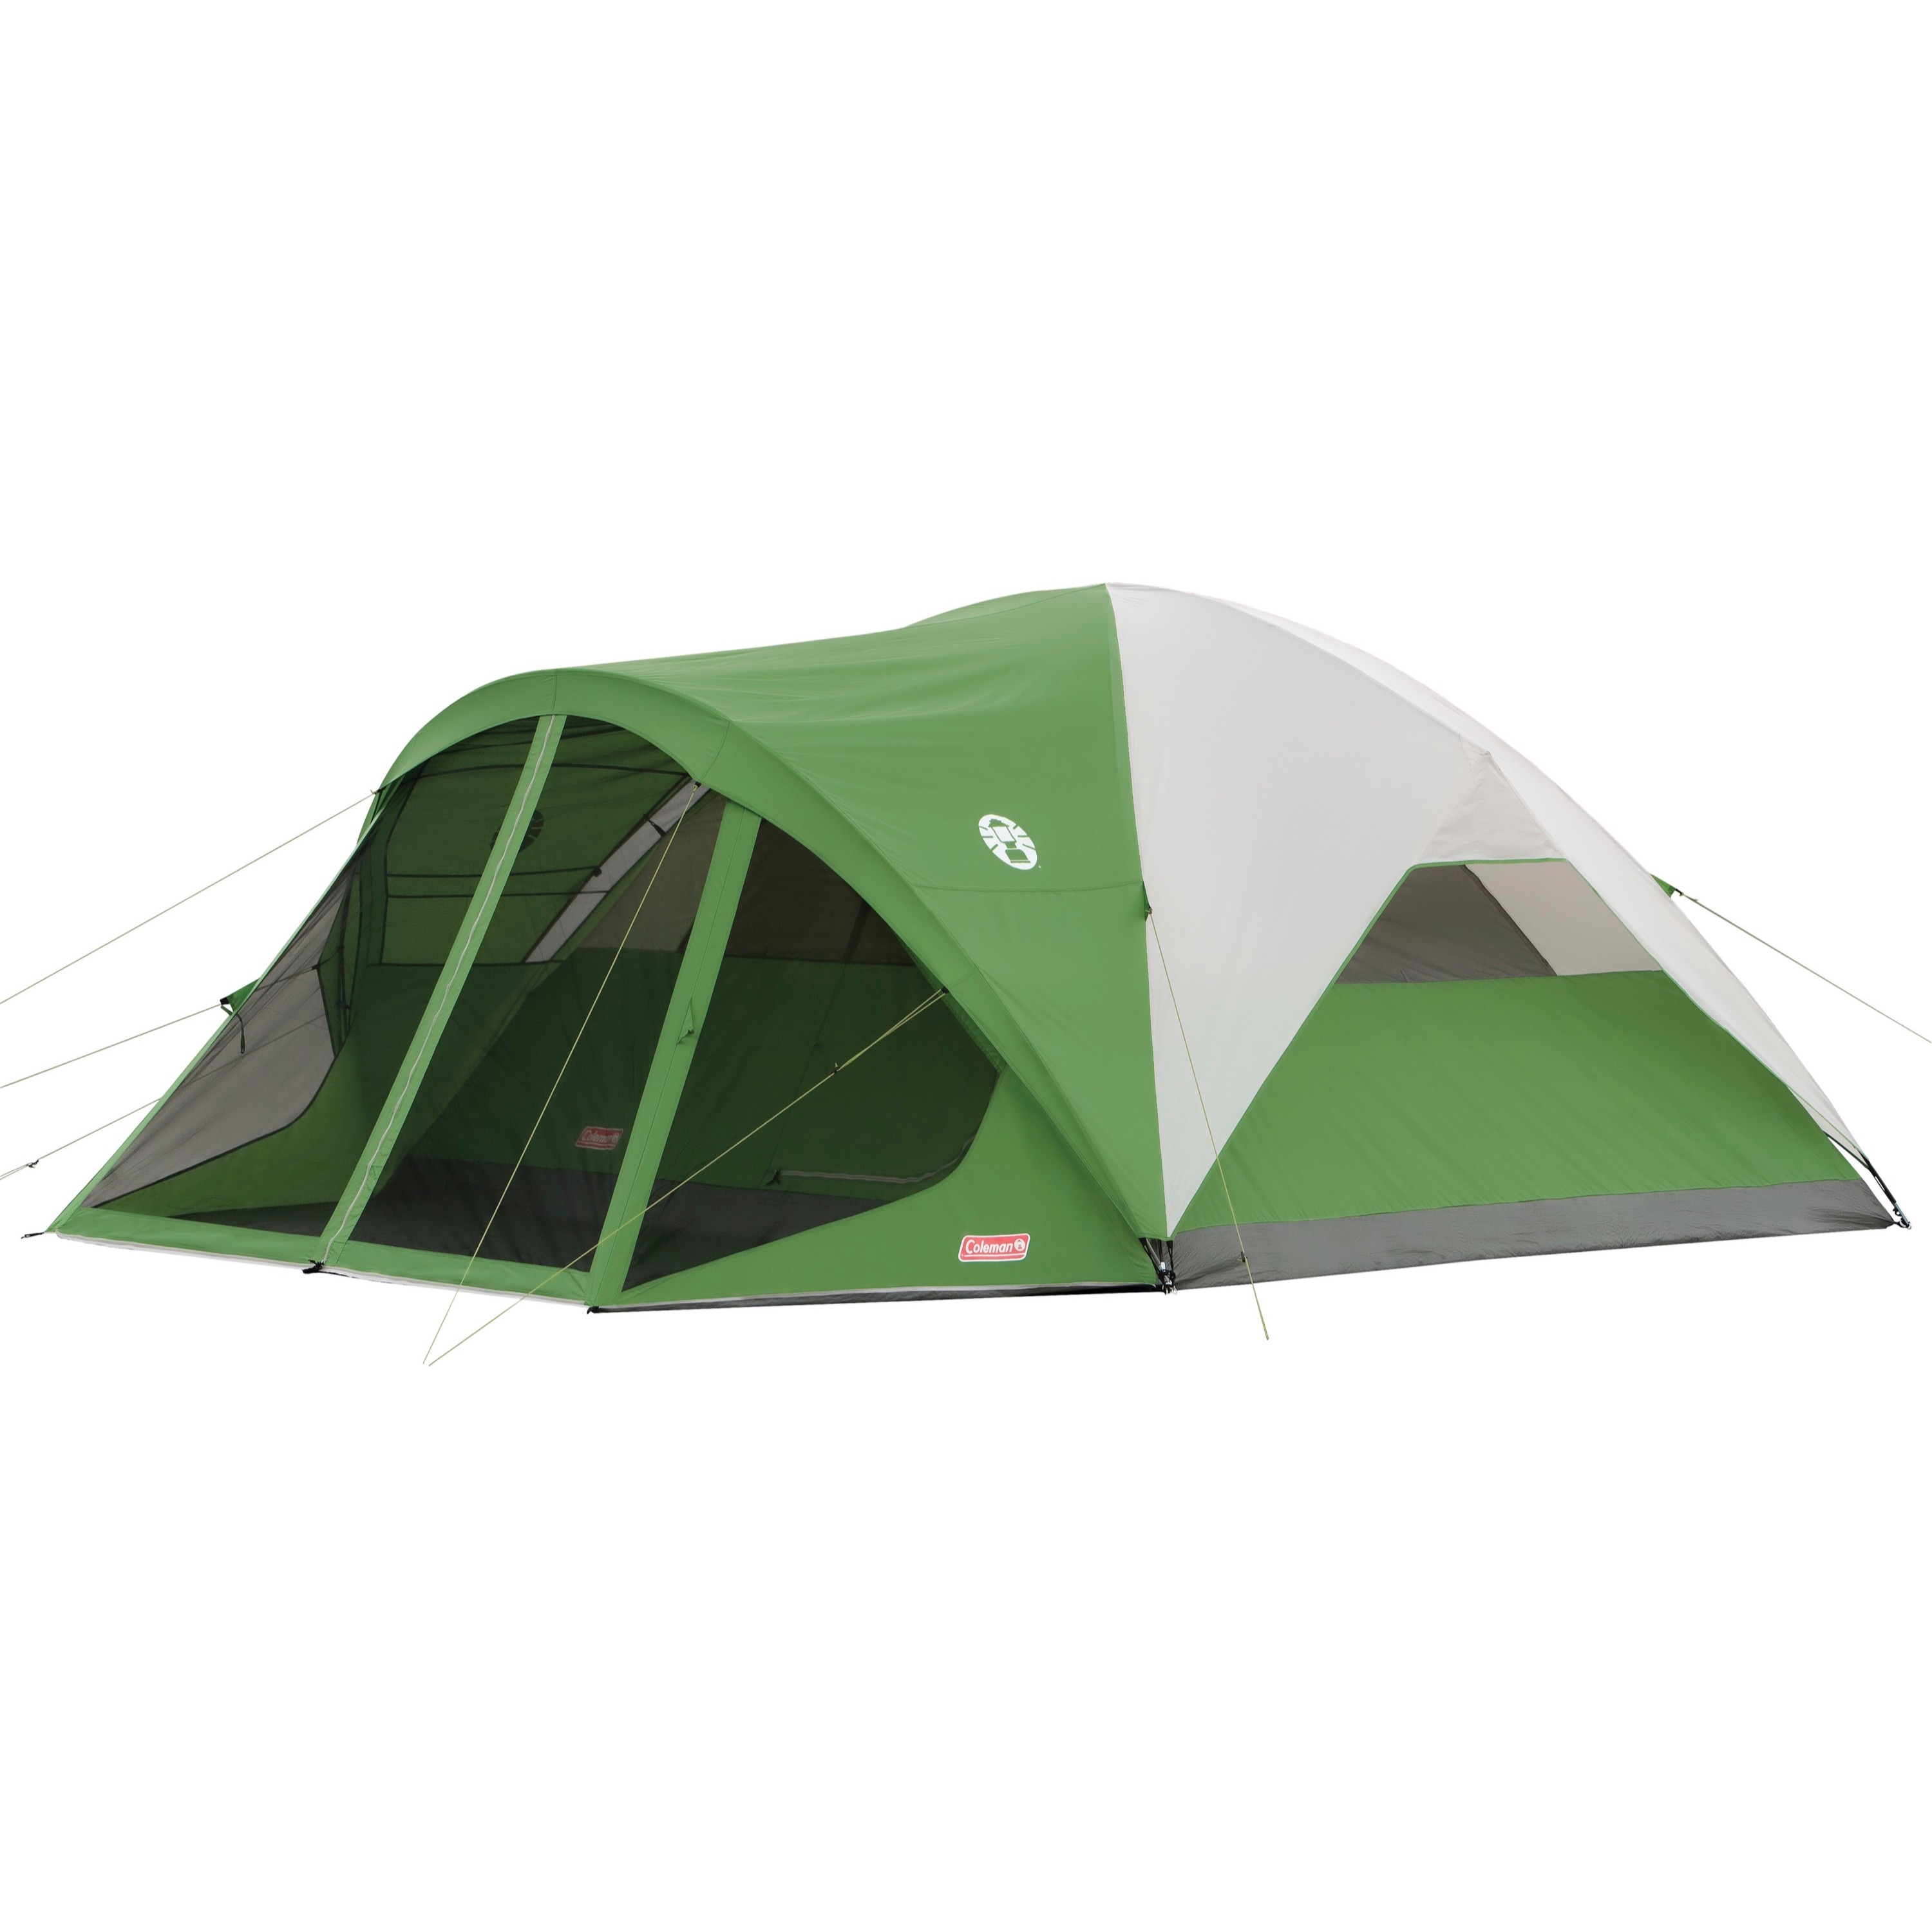 Coleman Evanston 8-Person Tent with Screen Room - image 1 of 5